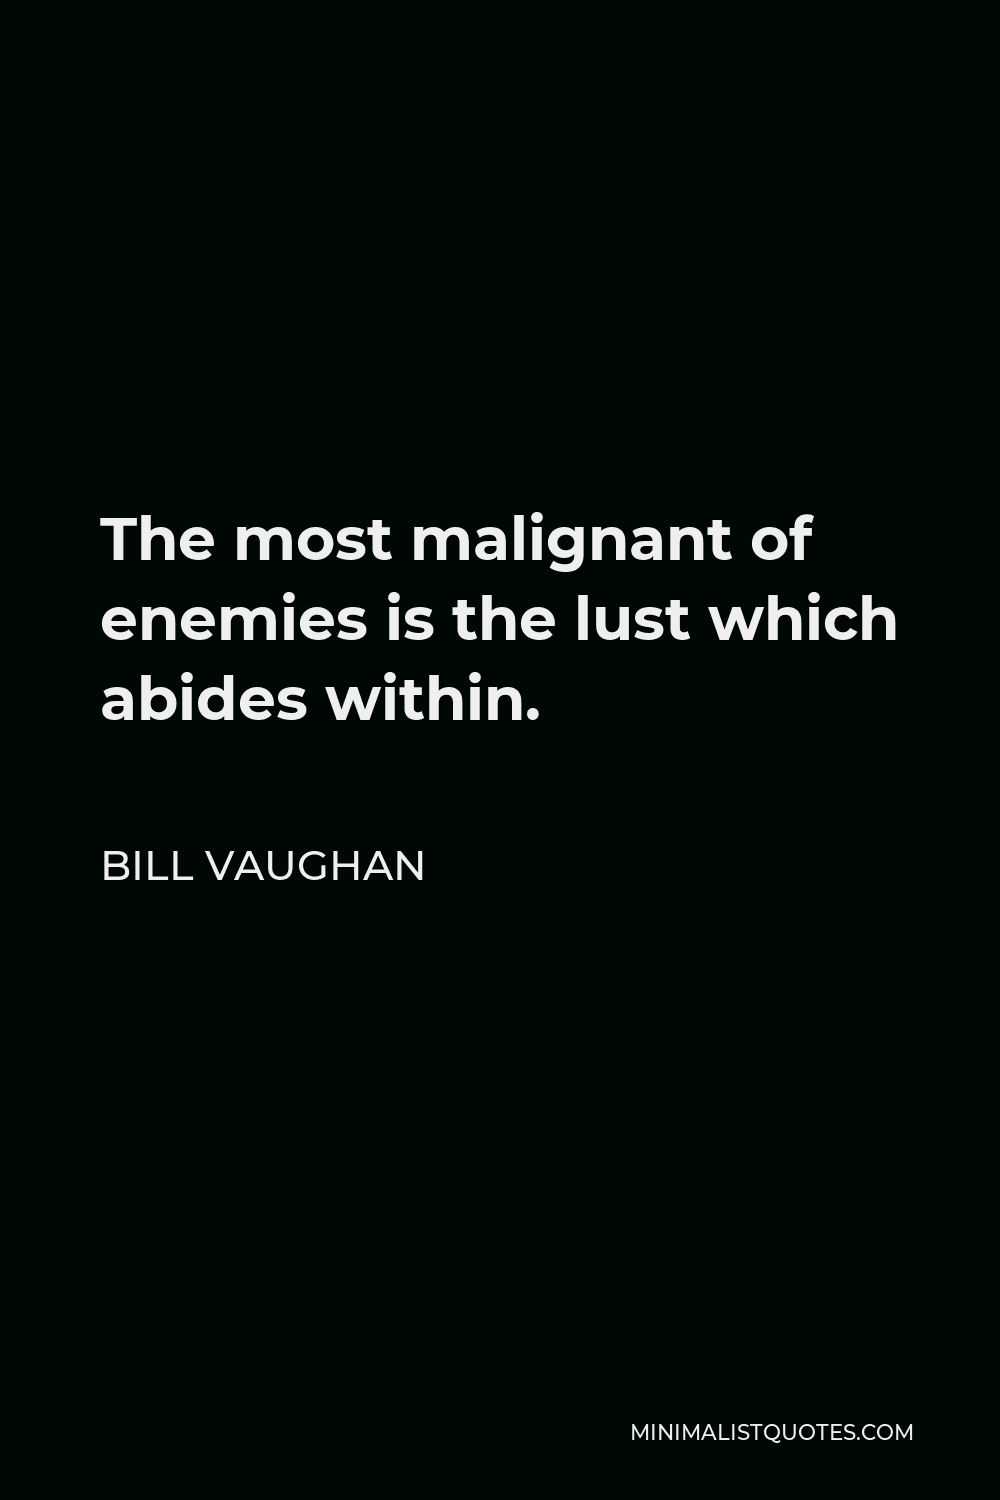 Bill Vaughan Quote - The most malignant of enemies is the lust which abides within.